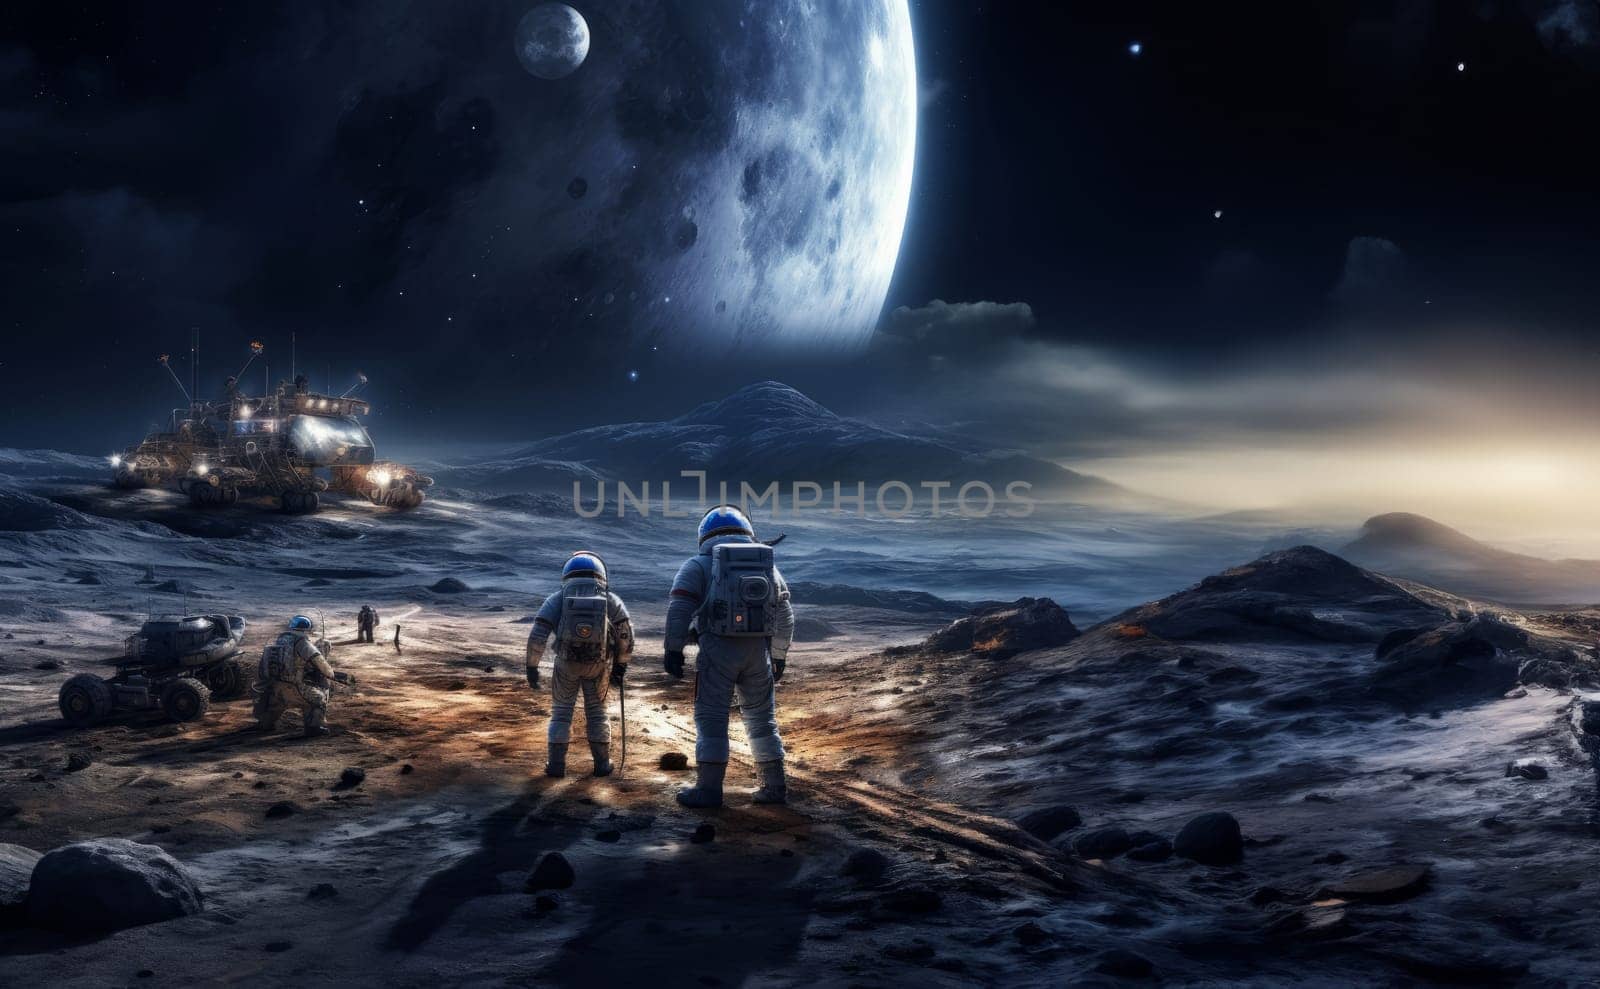 A group of modern astronauts is depicted exploring the hazardous surface of the moon in outer space, showcasing the daring mission of discovery and adventure in lunar exploration.Generated image by dotshock